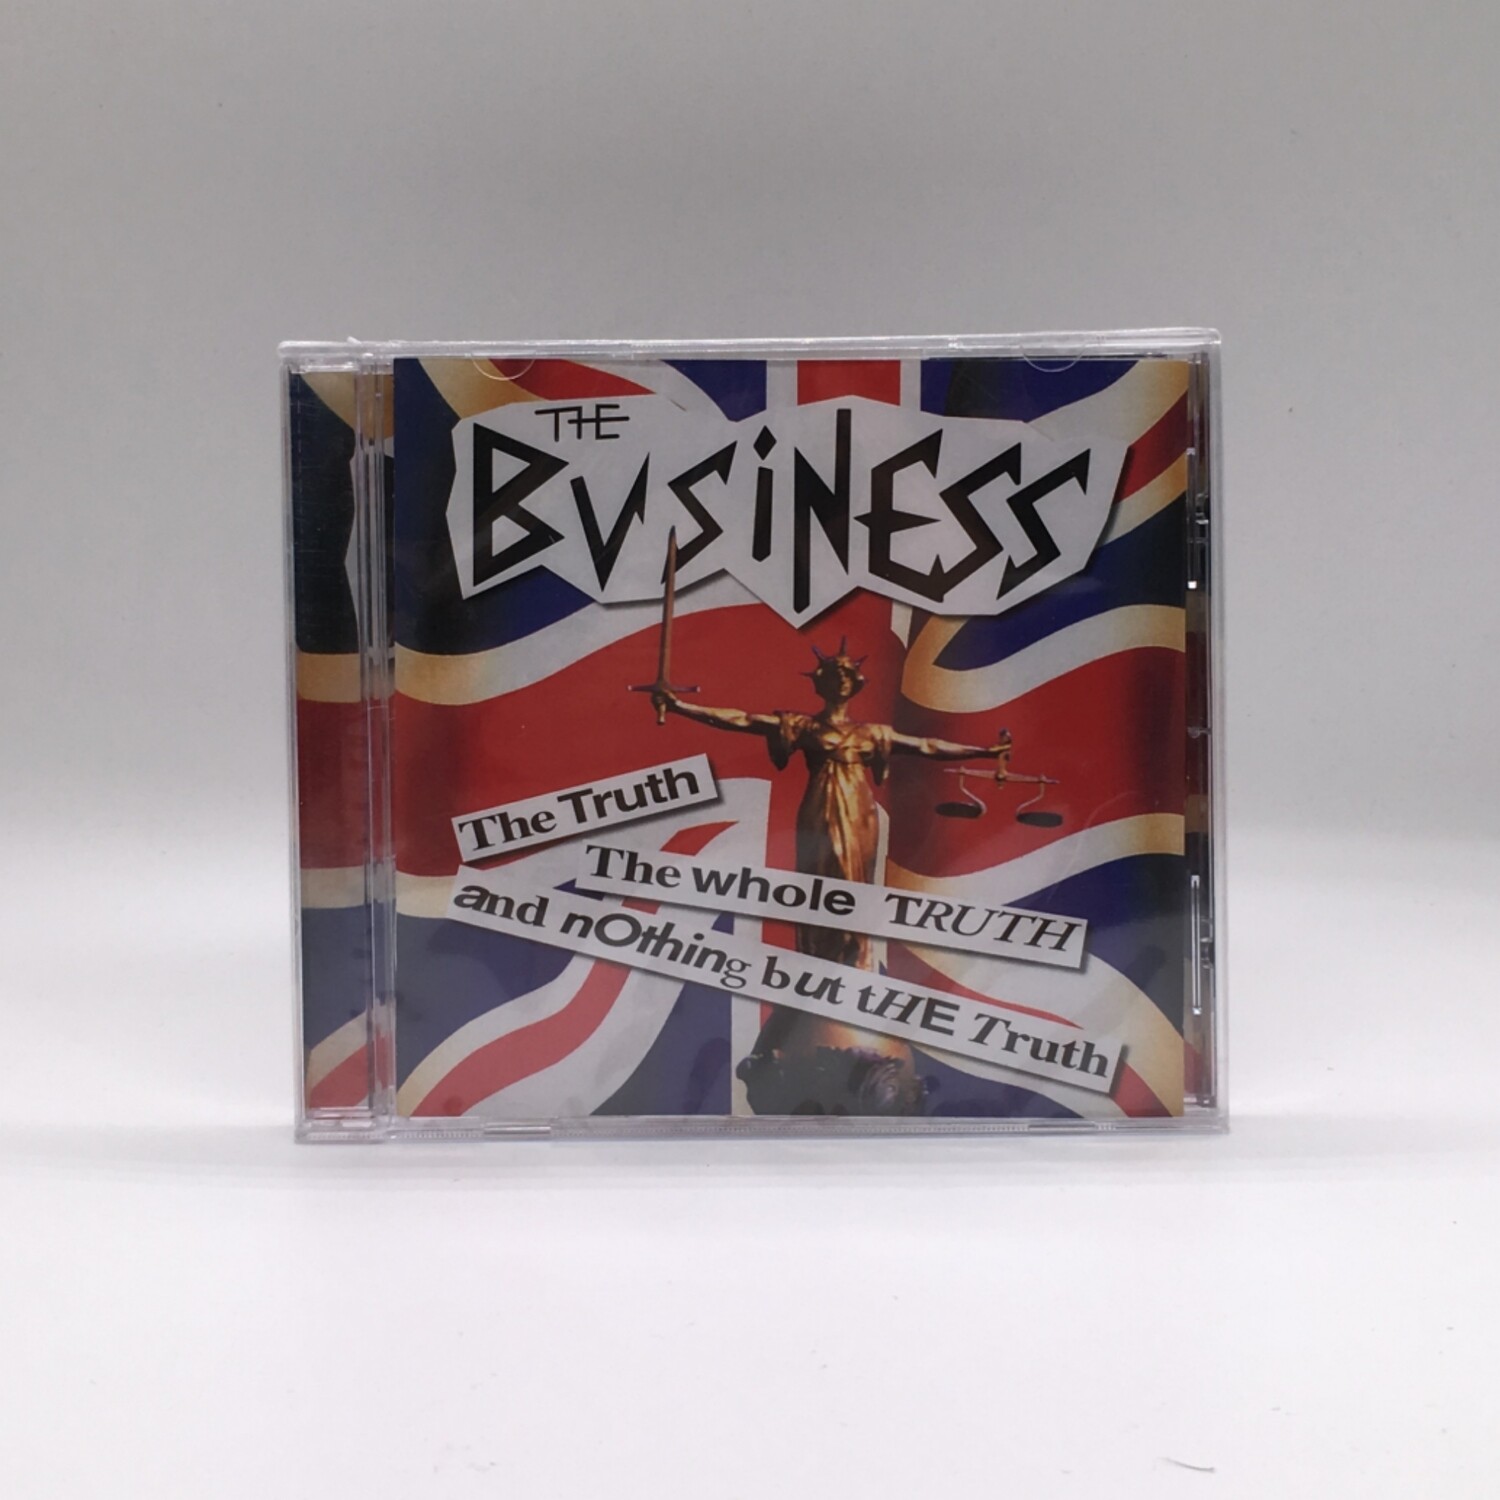 THE BUSINESS -THE TRUTH THE WHOLE TRUTH AND NOTHING BUT THE TRUTH- CD